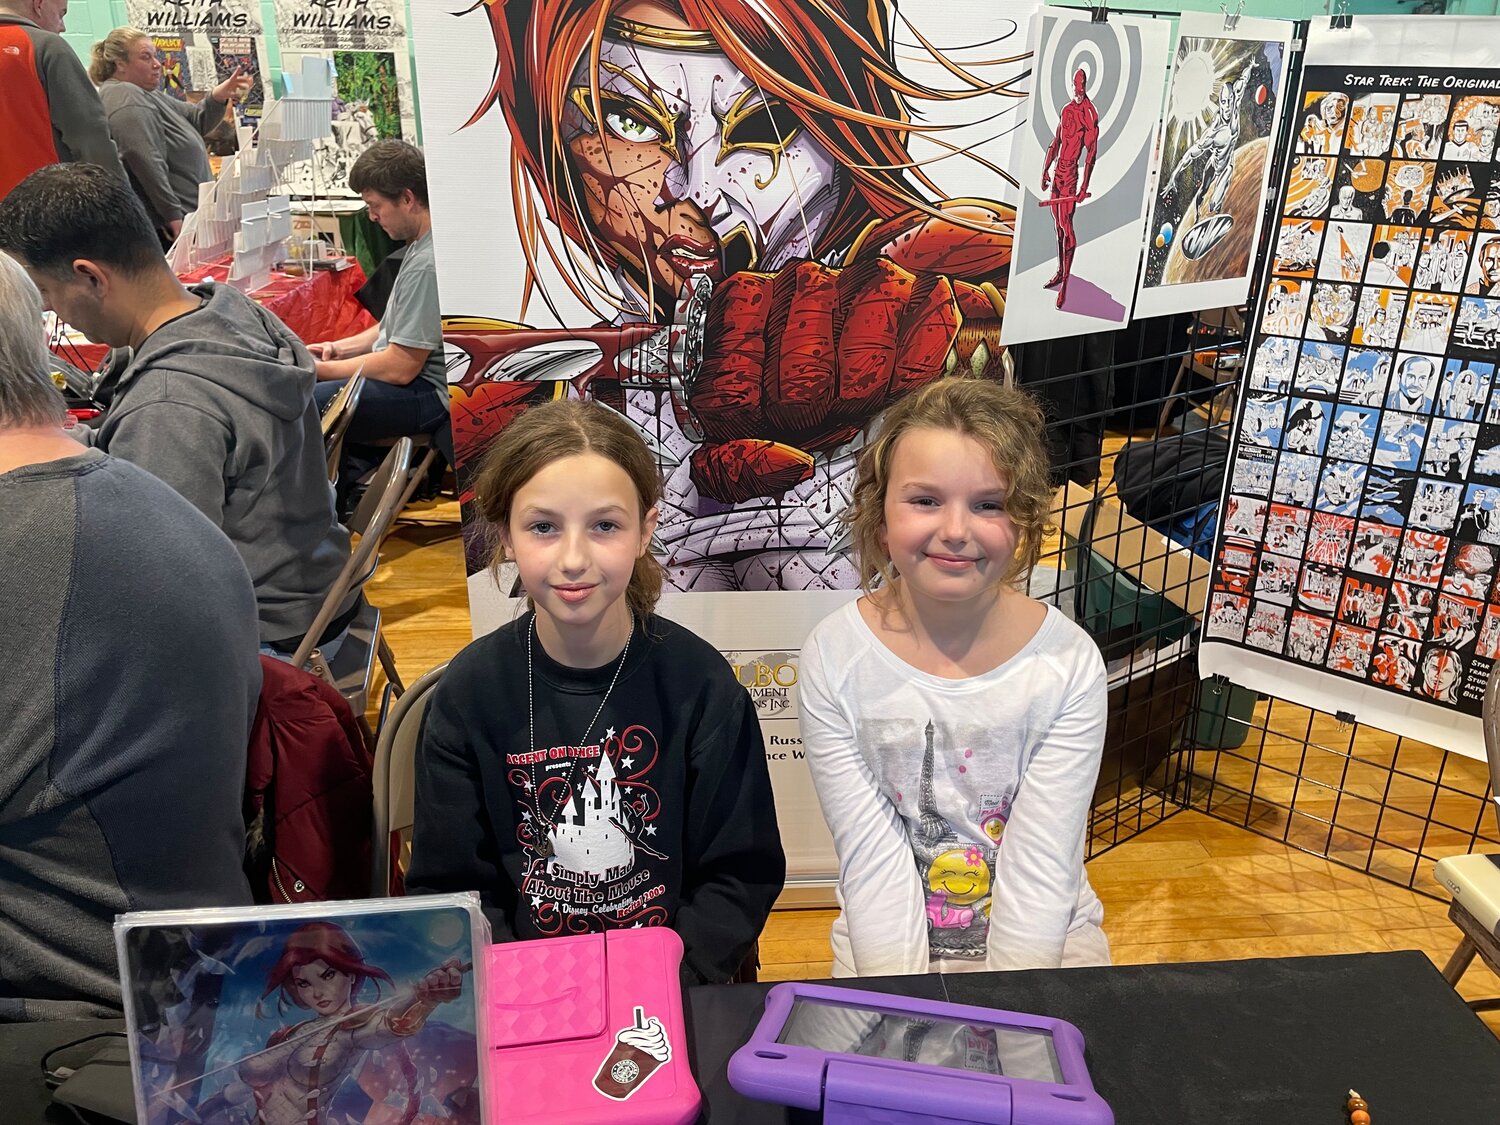 Melanie Russertt, 11, left, isn’t a big fan of comics, but her sister Kaylee, 9, has a 15-way tie for her favorite superhero. They both say that their favorite part of HurriCon is supporting their dad, Phil, who created an original comic series.